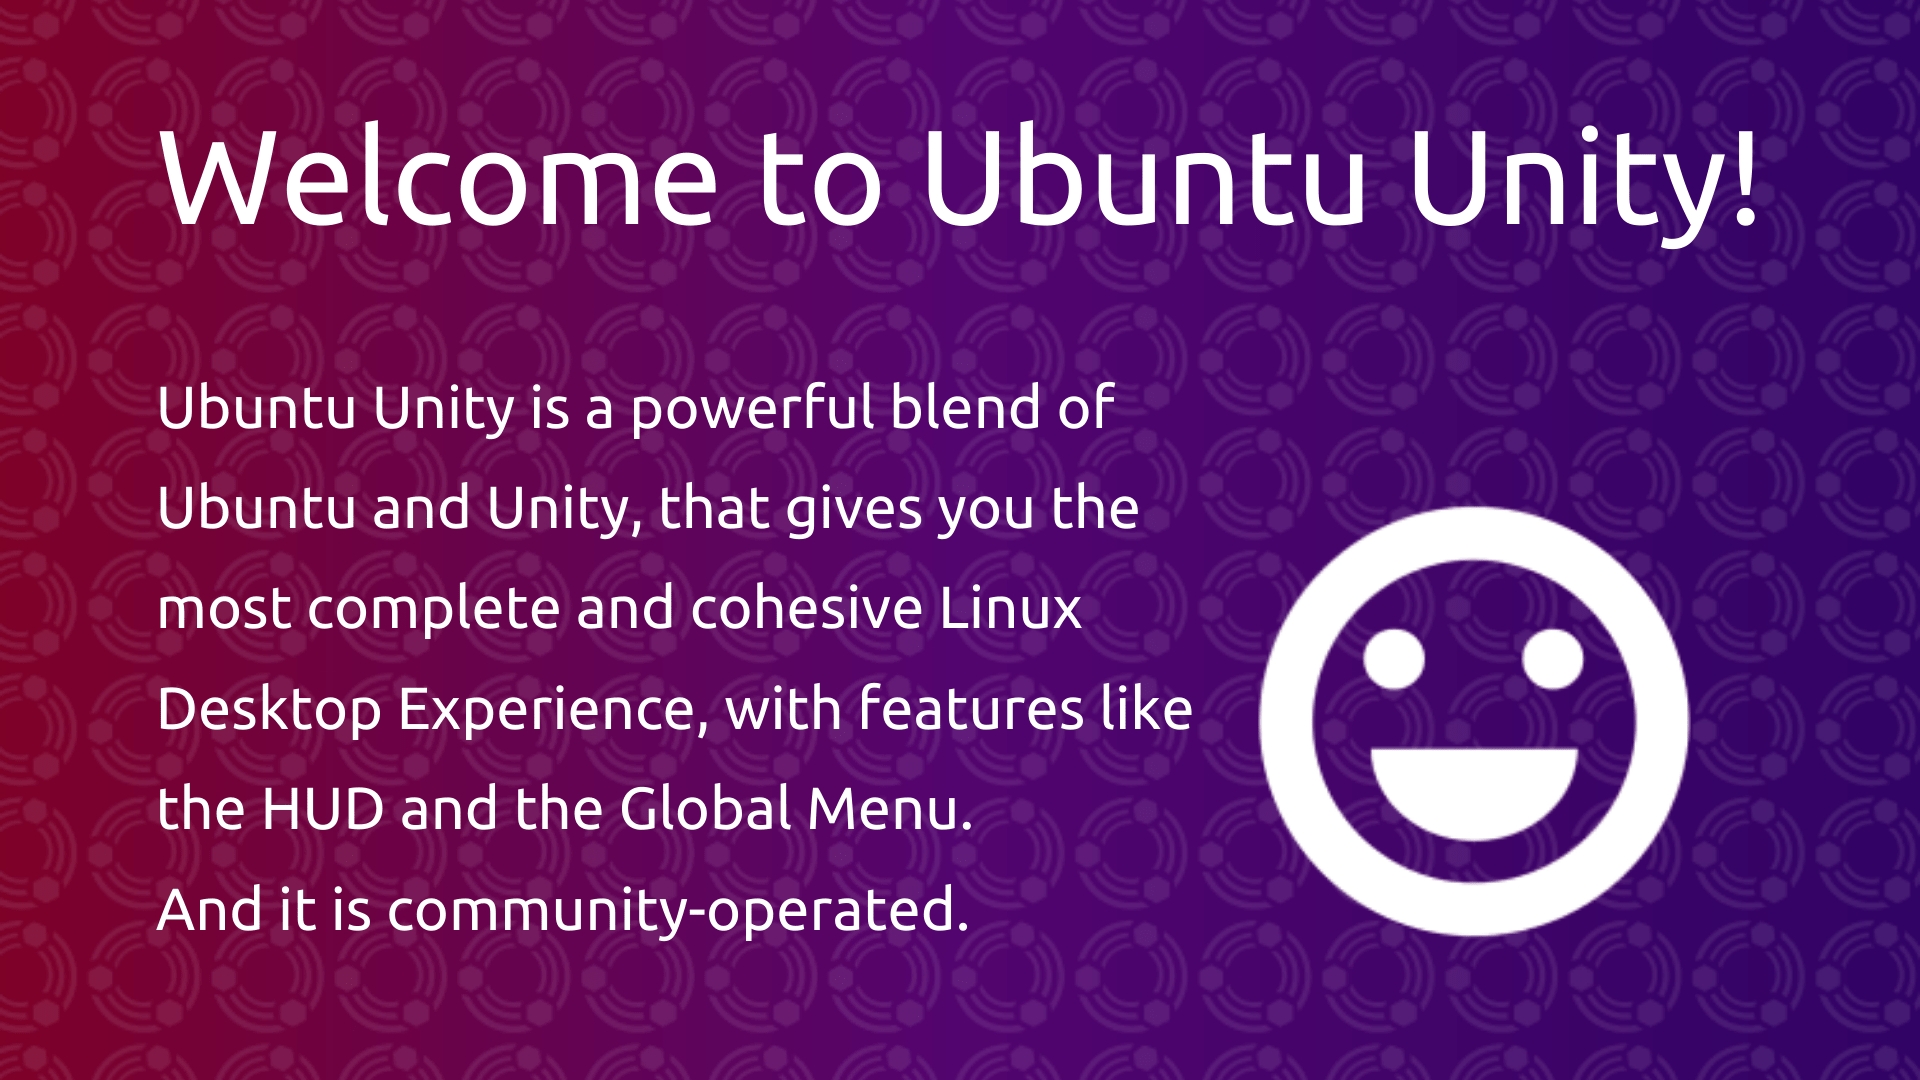 Ubuntu Unity 20.04.1 Launches with Nemo as Default File Manager, Timeshift Backup Tool